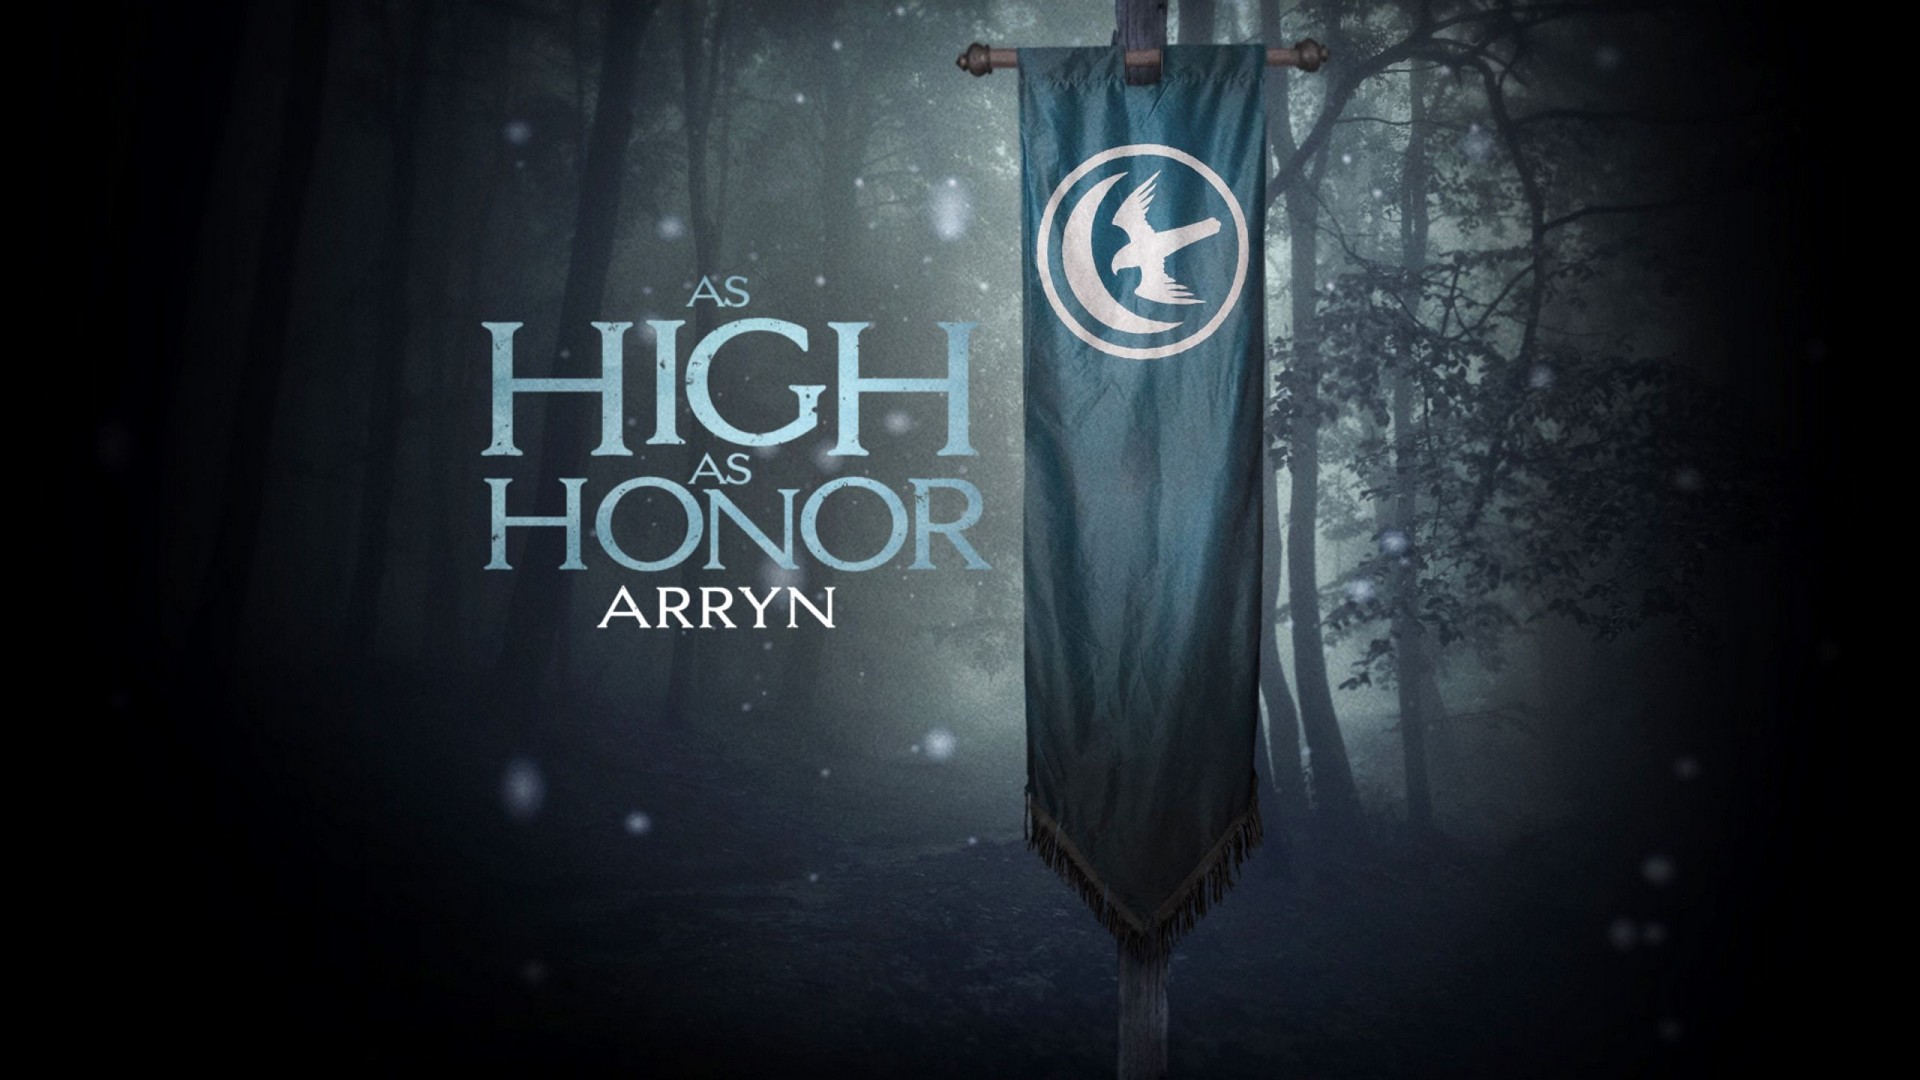 House Arryn Game of Thrones Wallpaper HD with high-resolution 1920x1080 pixel. You can use this poster wallpaper for your Desktop Computers, Mac Screensavers, Windows Backgrounds, iPhone Wallpapers, Tablet or Android Lock screen and another Mobile device